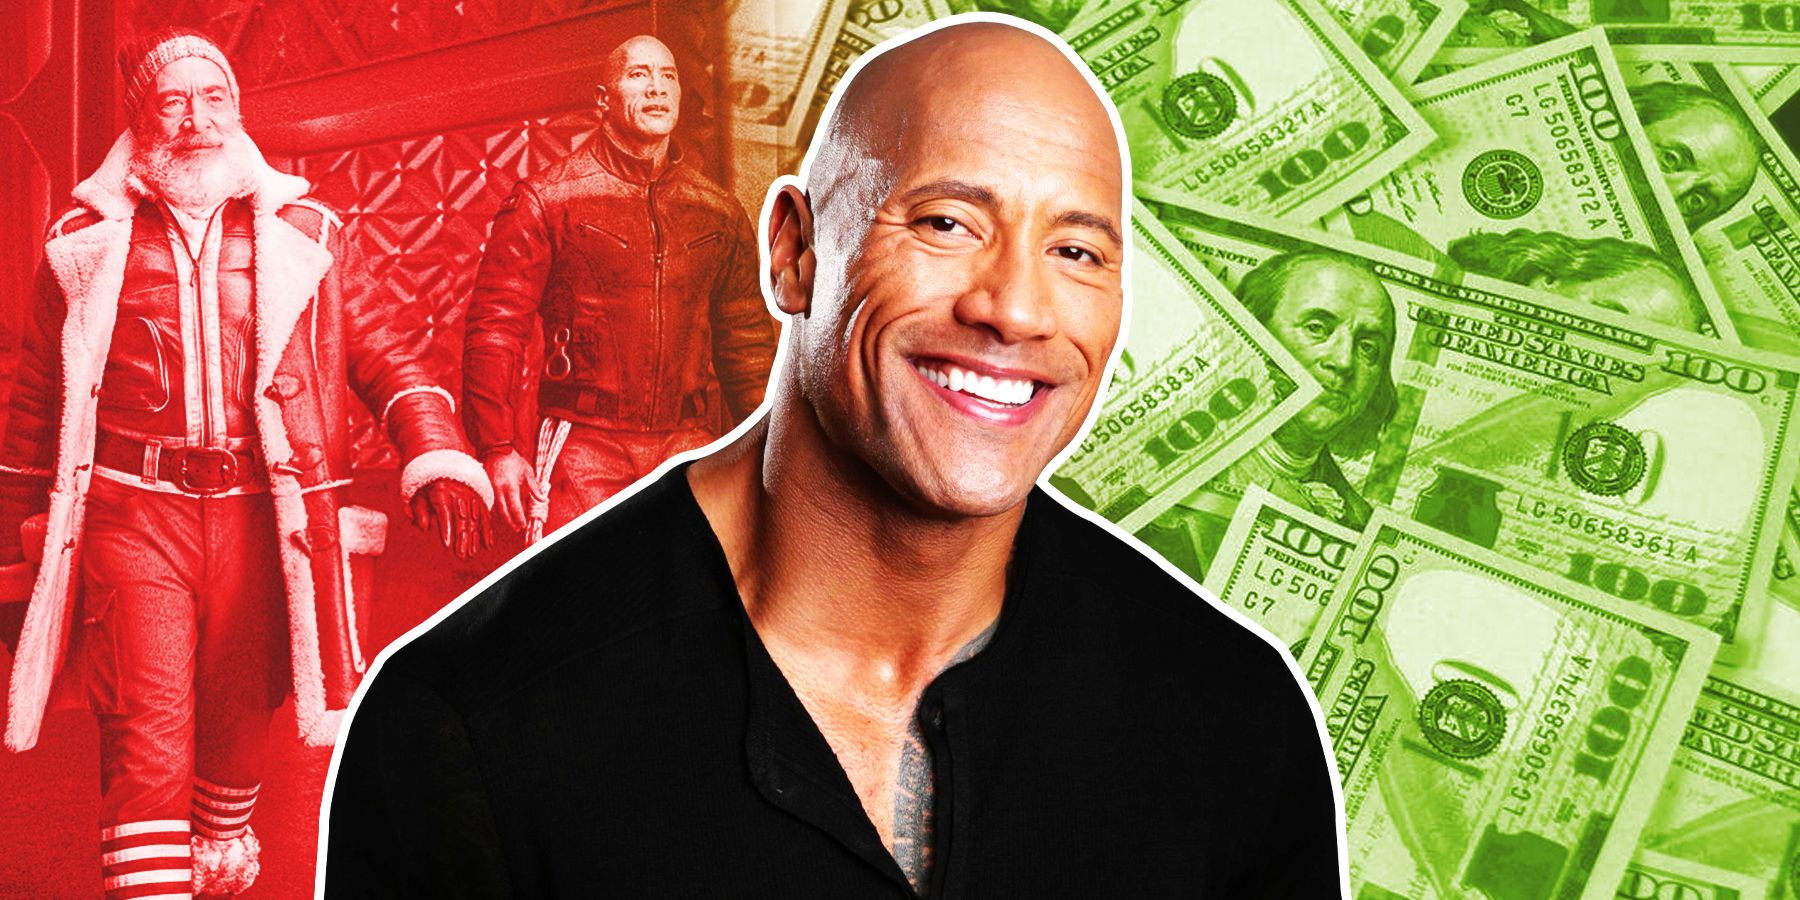 Dwayne Johnson in movie Red One with actor J.K. Simmons in movie Red One, Dwayne Johnson smiling, and a pile of money.